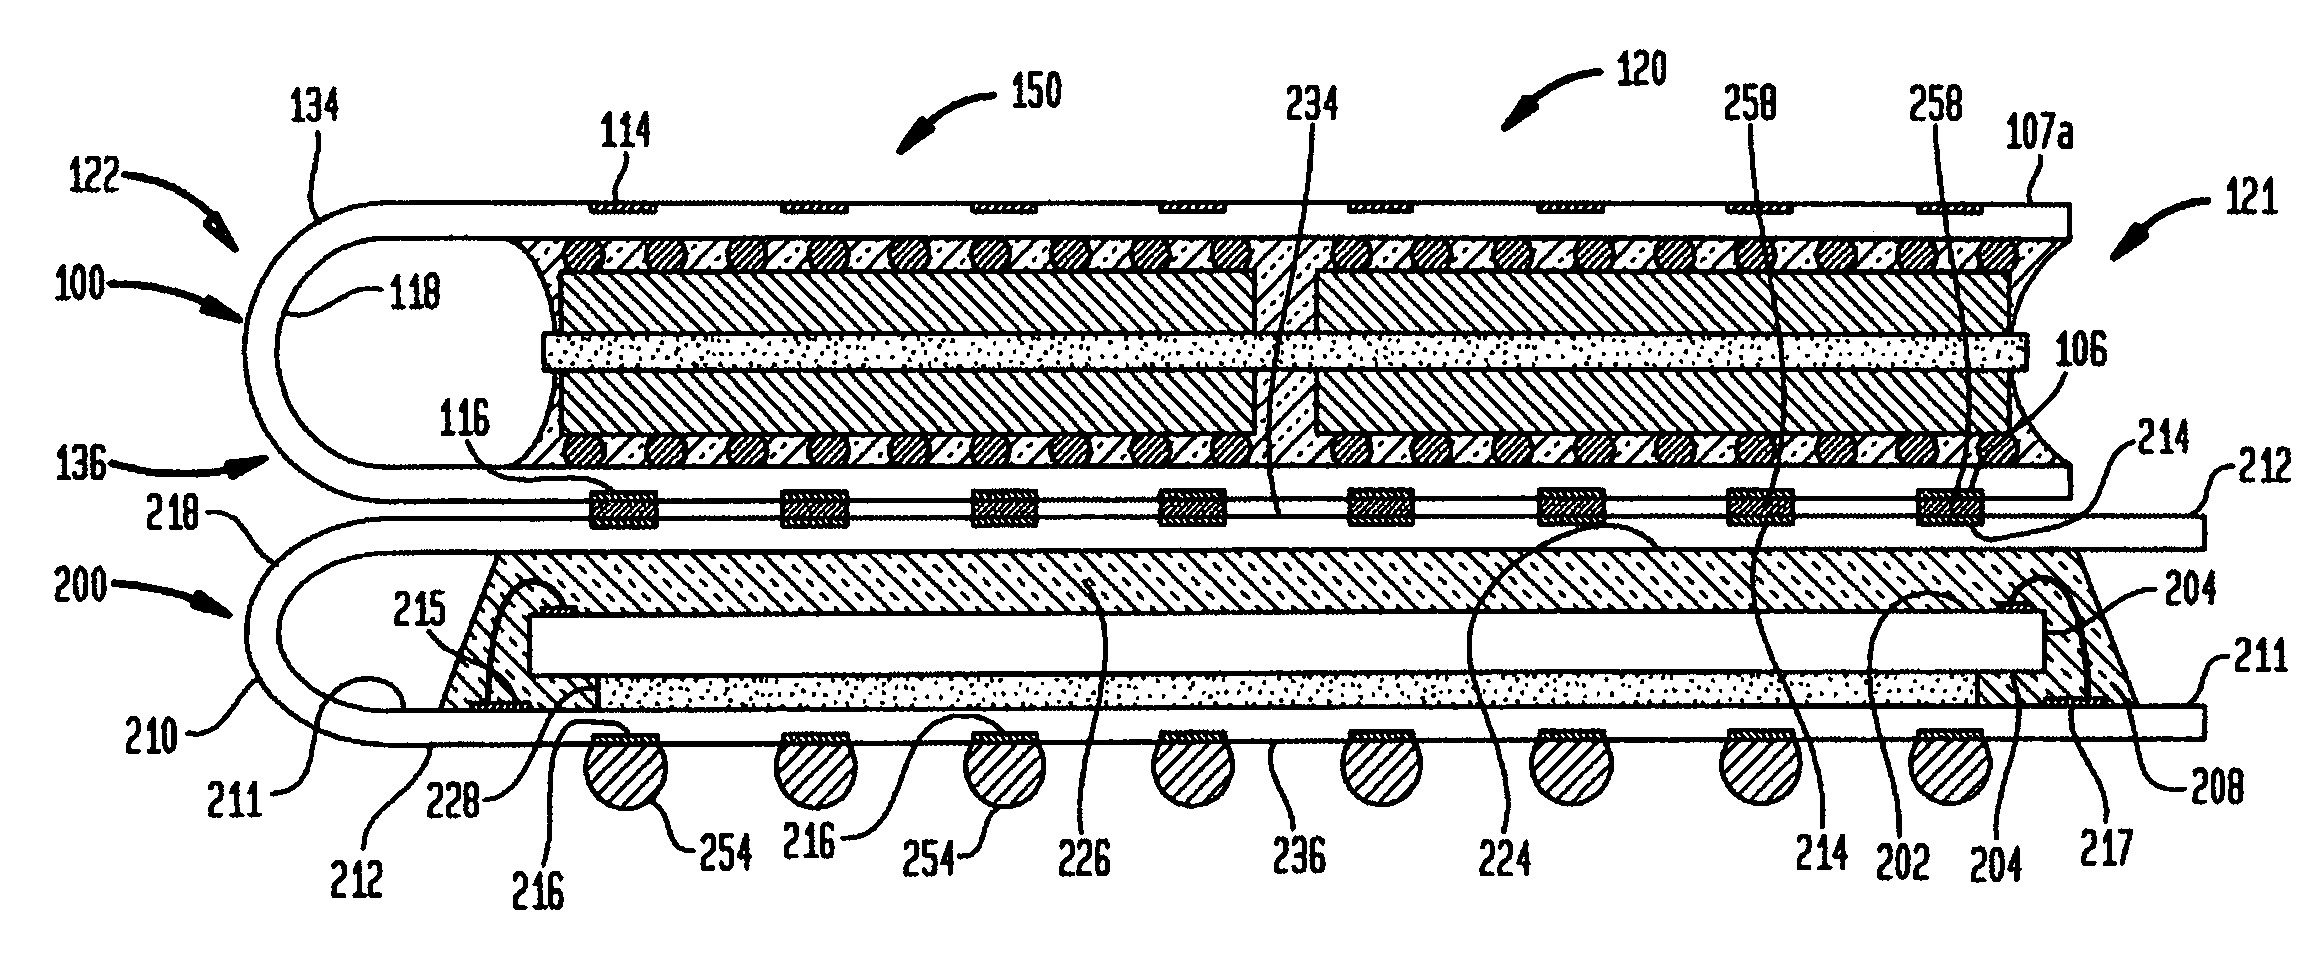 Stacked microelectronic assemblies